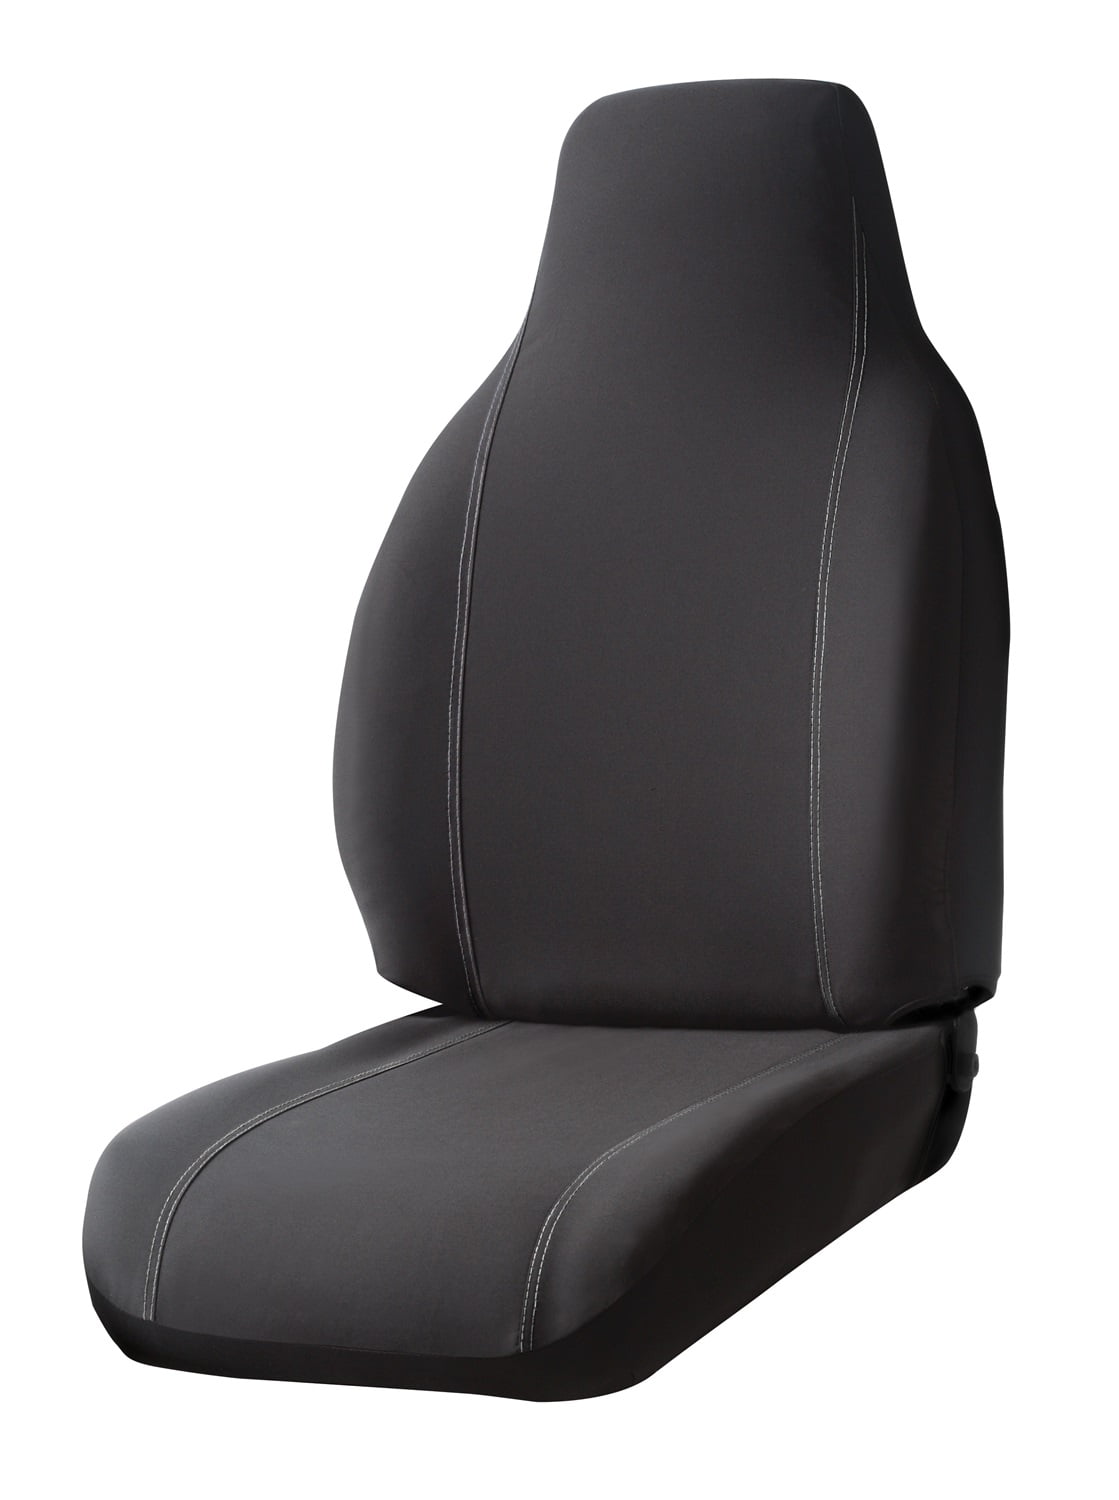 Solid Black Leatherette Fia SL69-74 BLK/BLK Custom Fit Front Seat Cover Bucket Seats 